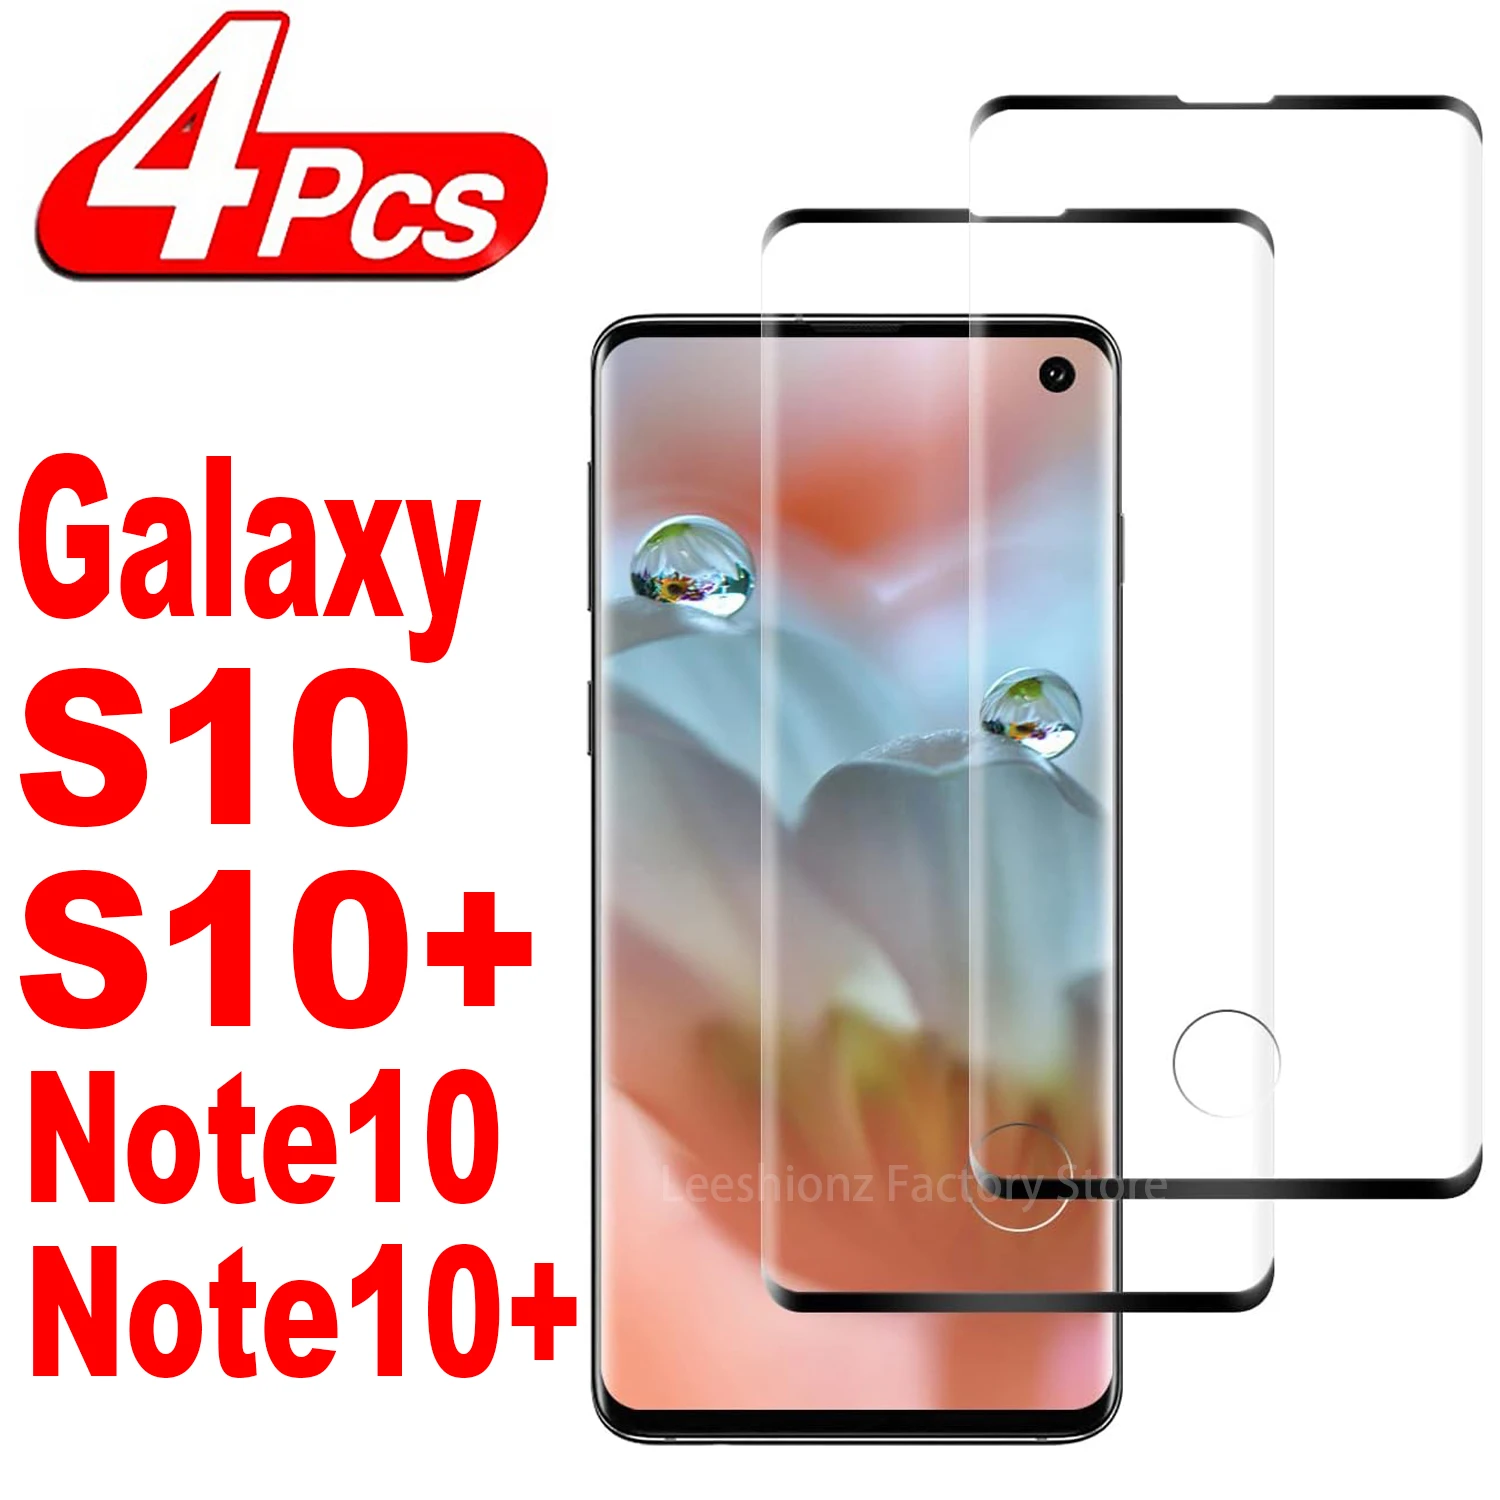 1/4Pcs 3D Screen Protector Glass For Samsung Galaxy S10 S10+ Note 10 Plus Note10+ Tempered Glass Film tempered glass film for samsung galaxy s20 s10 s9 s8 plus s10e s20ultra s10 5g full curved screen protector